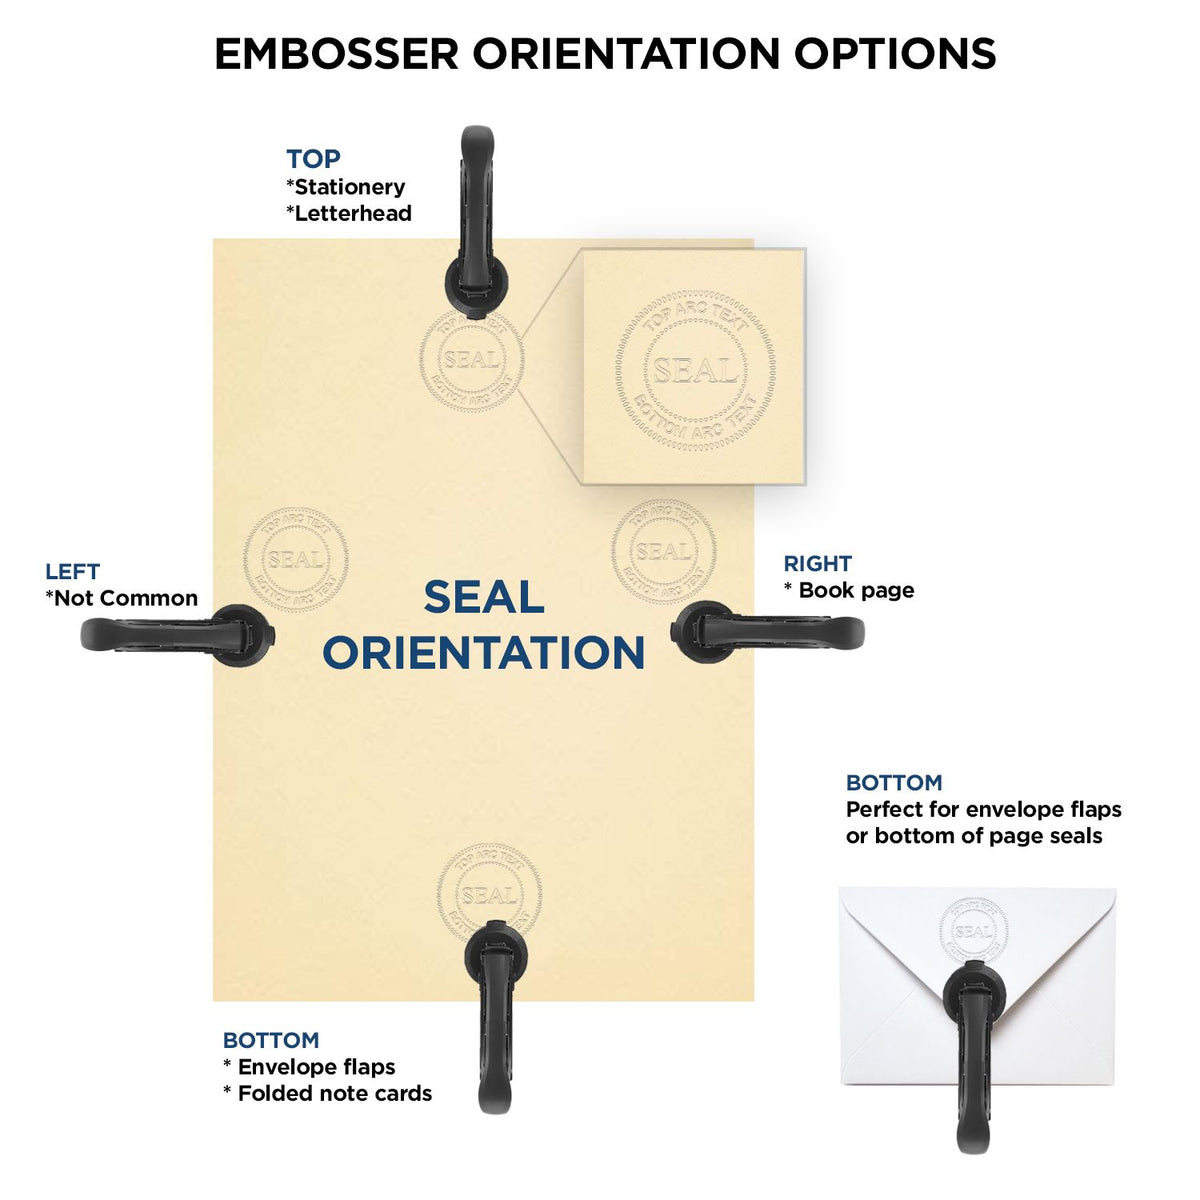 An infographic for the State of Texas Extended Long Reach Engineer Seal showing embosser orientation, this is showing examples of a top, bottom, right and left insert.